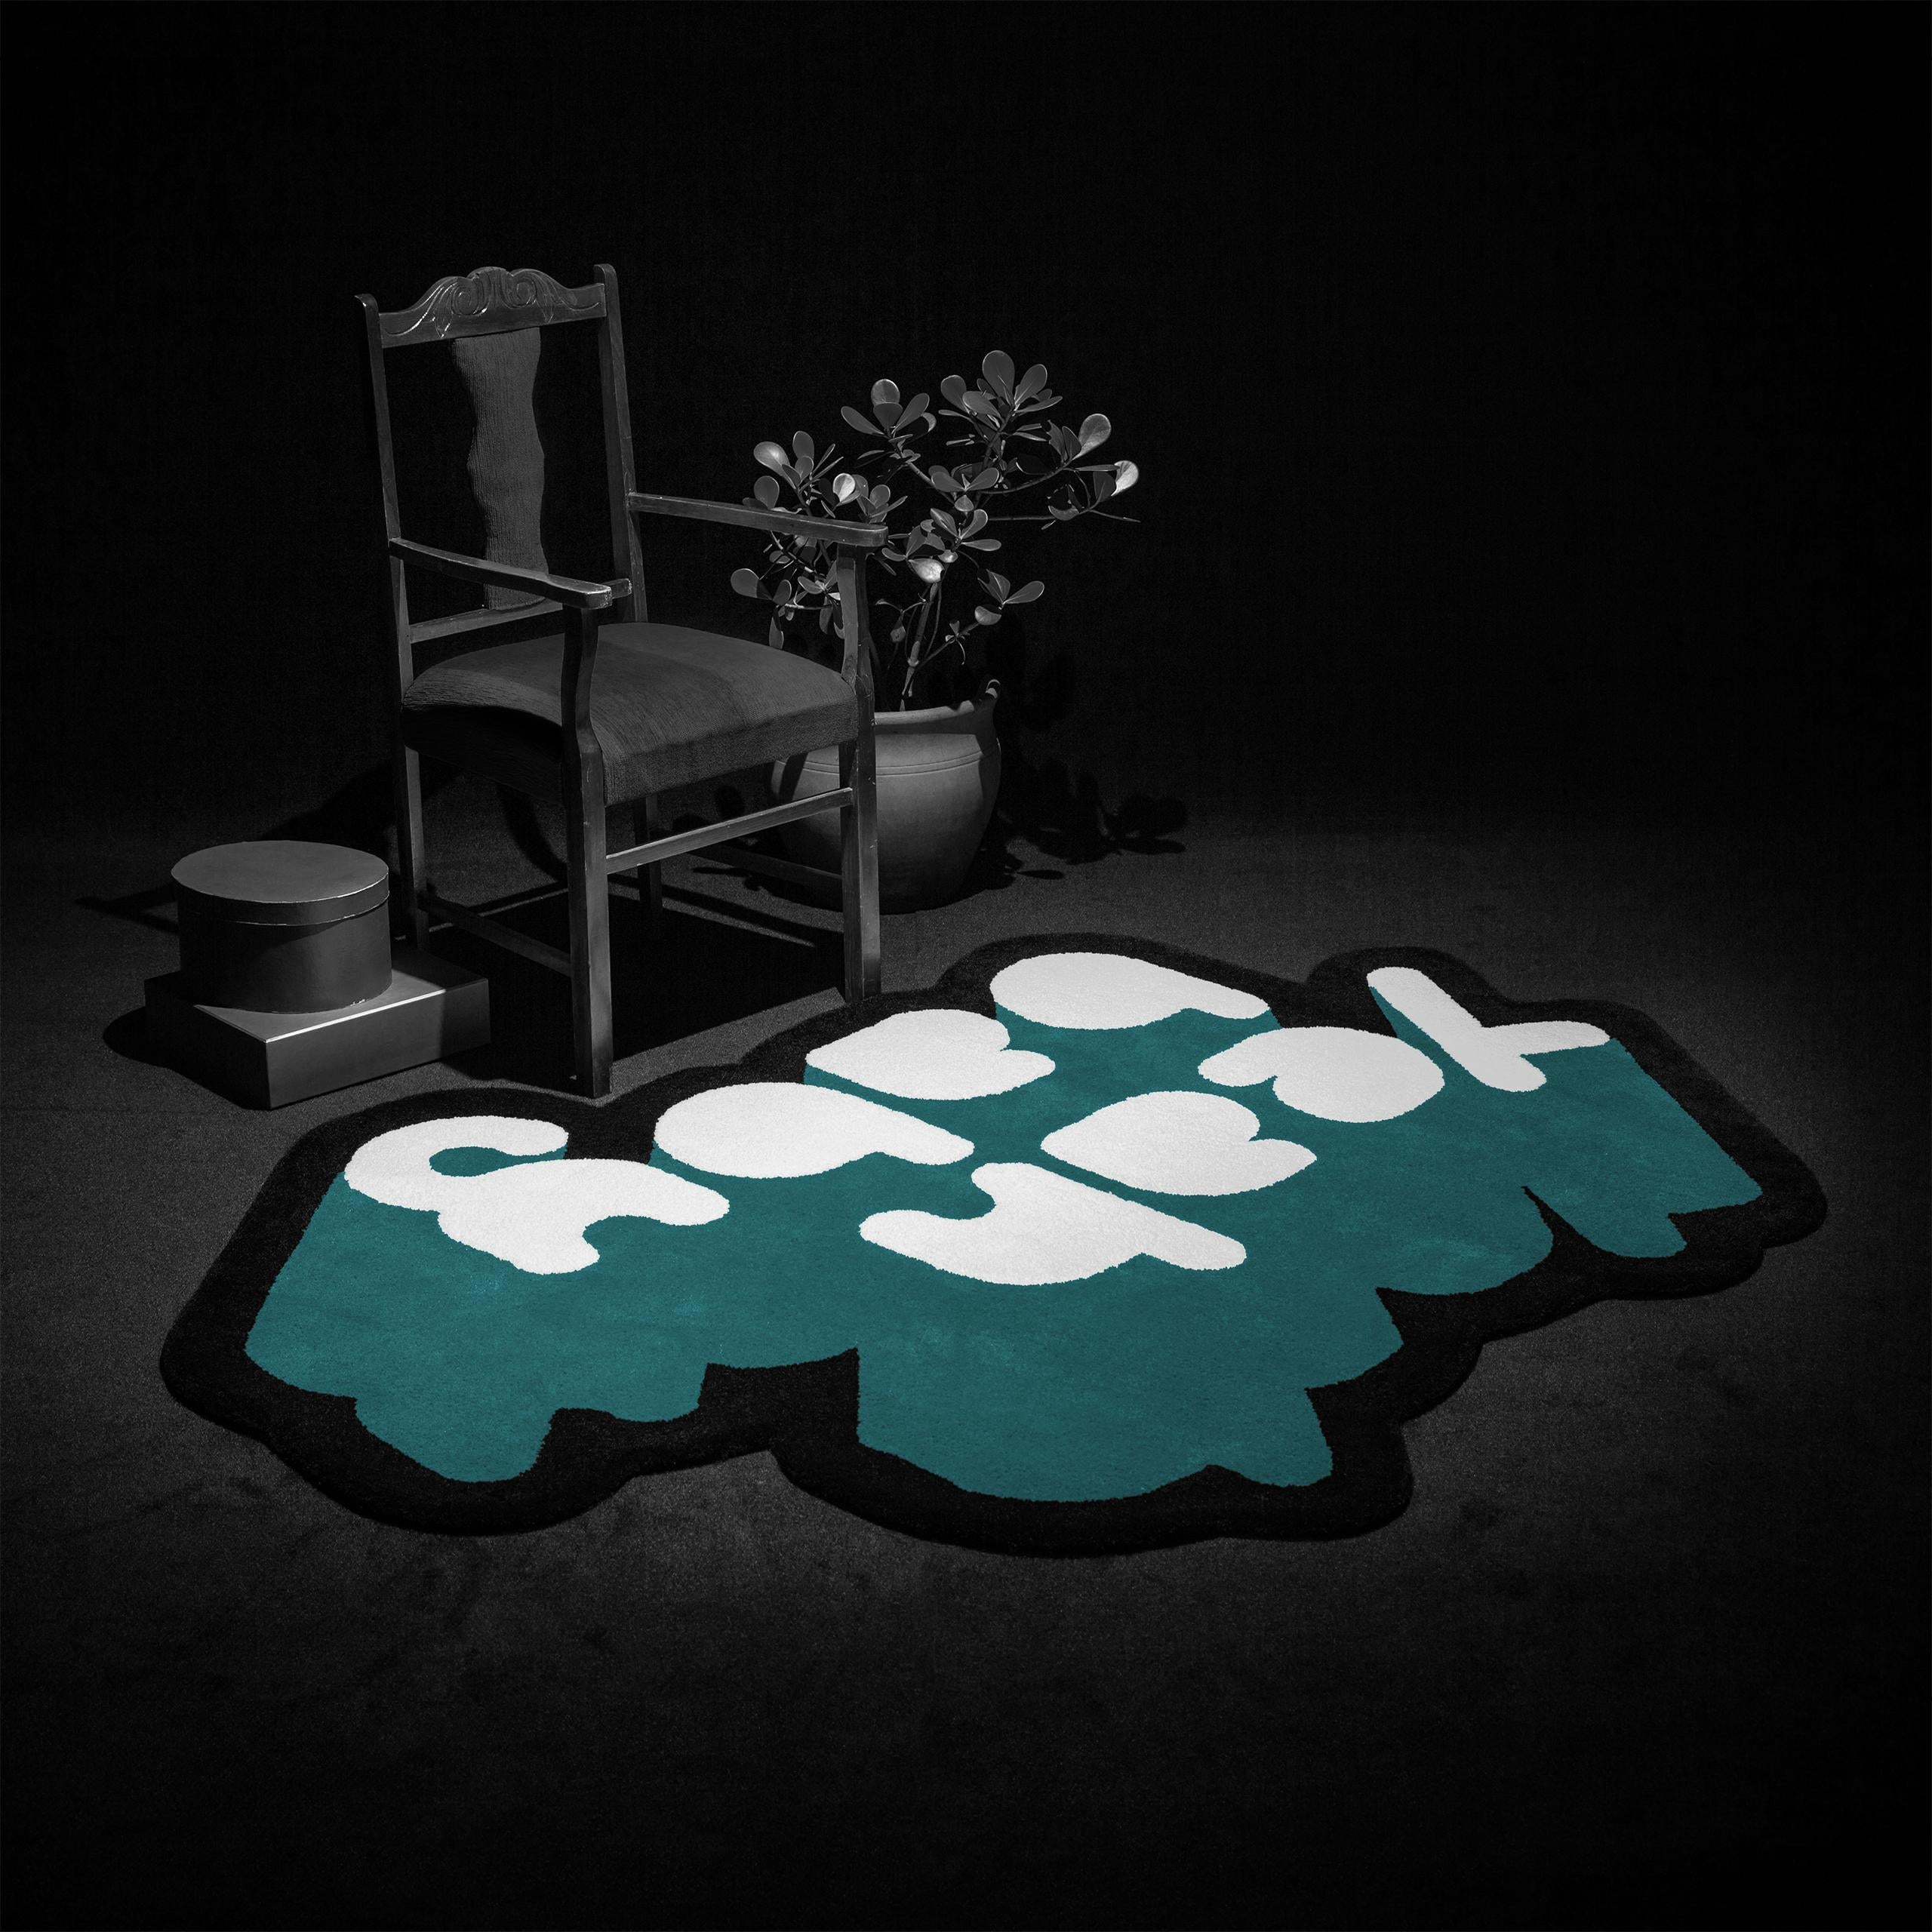 Modern Playful 3 Colors Yeah Baby Rug from Graffiti Collection by Paulo Kobylka, Large For Sale